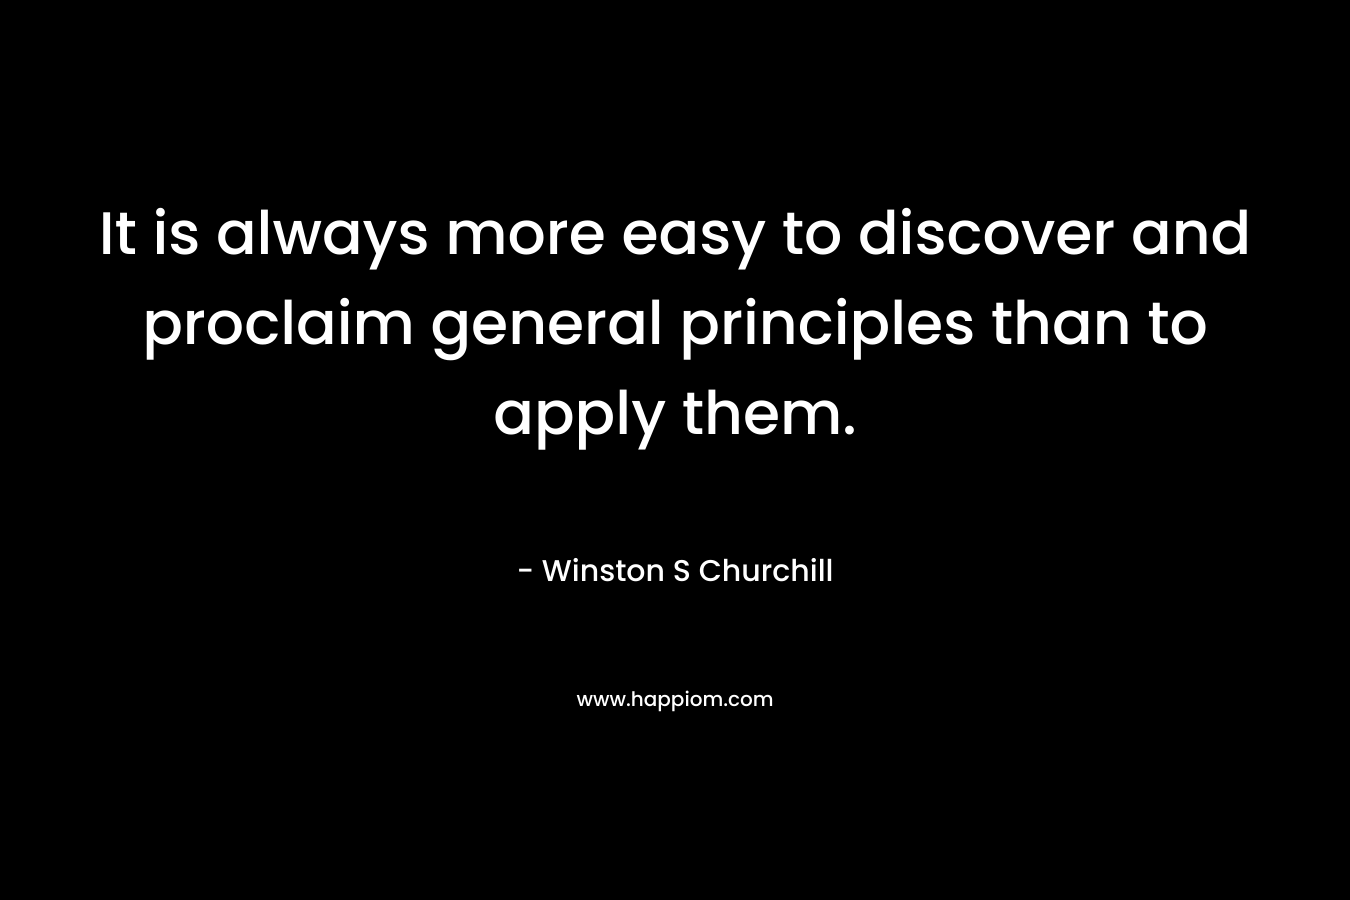 It is always more easy to discover and proclaim general principles than to apply them.